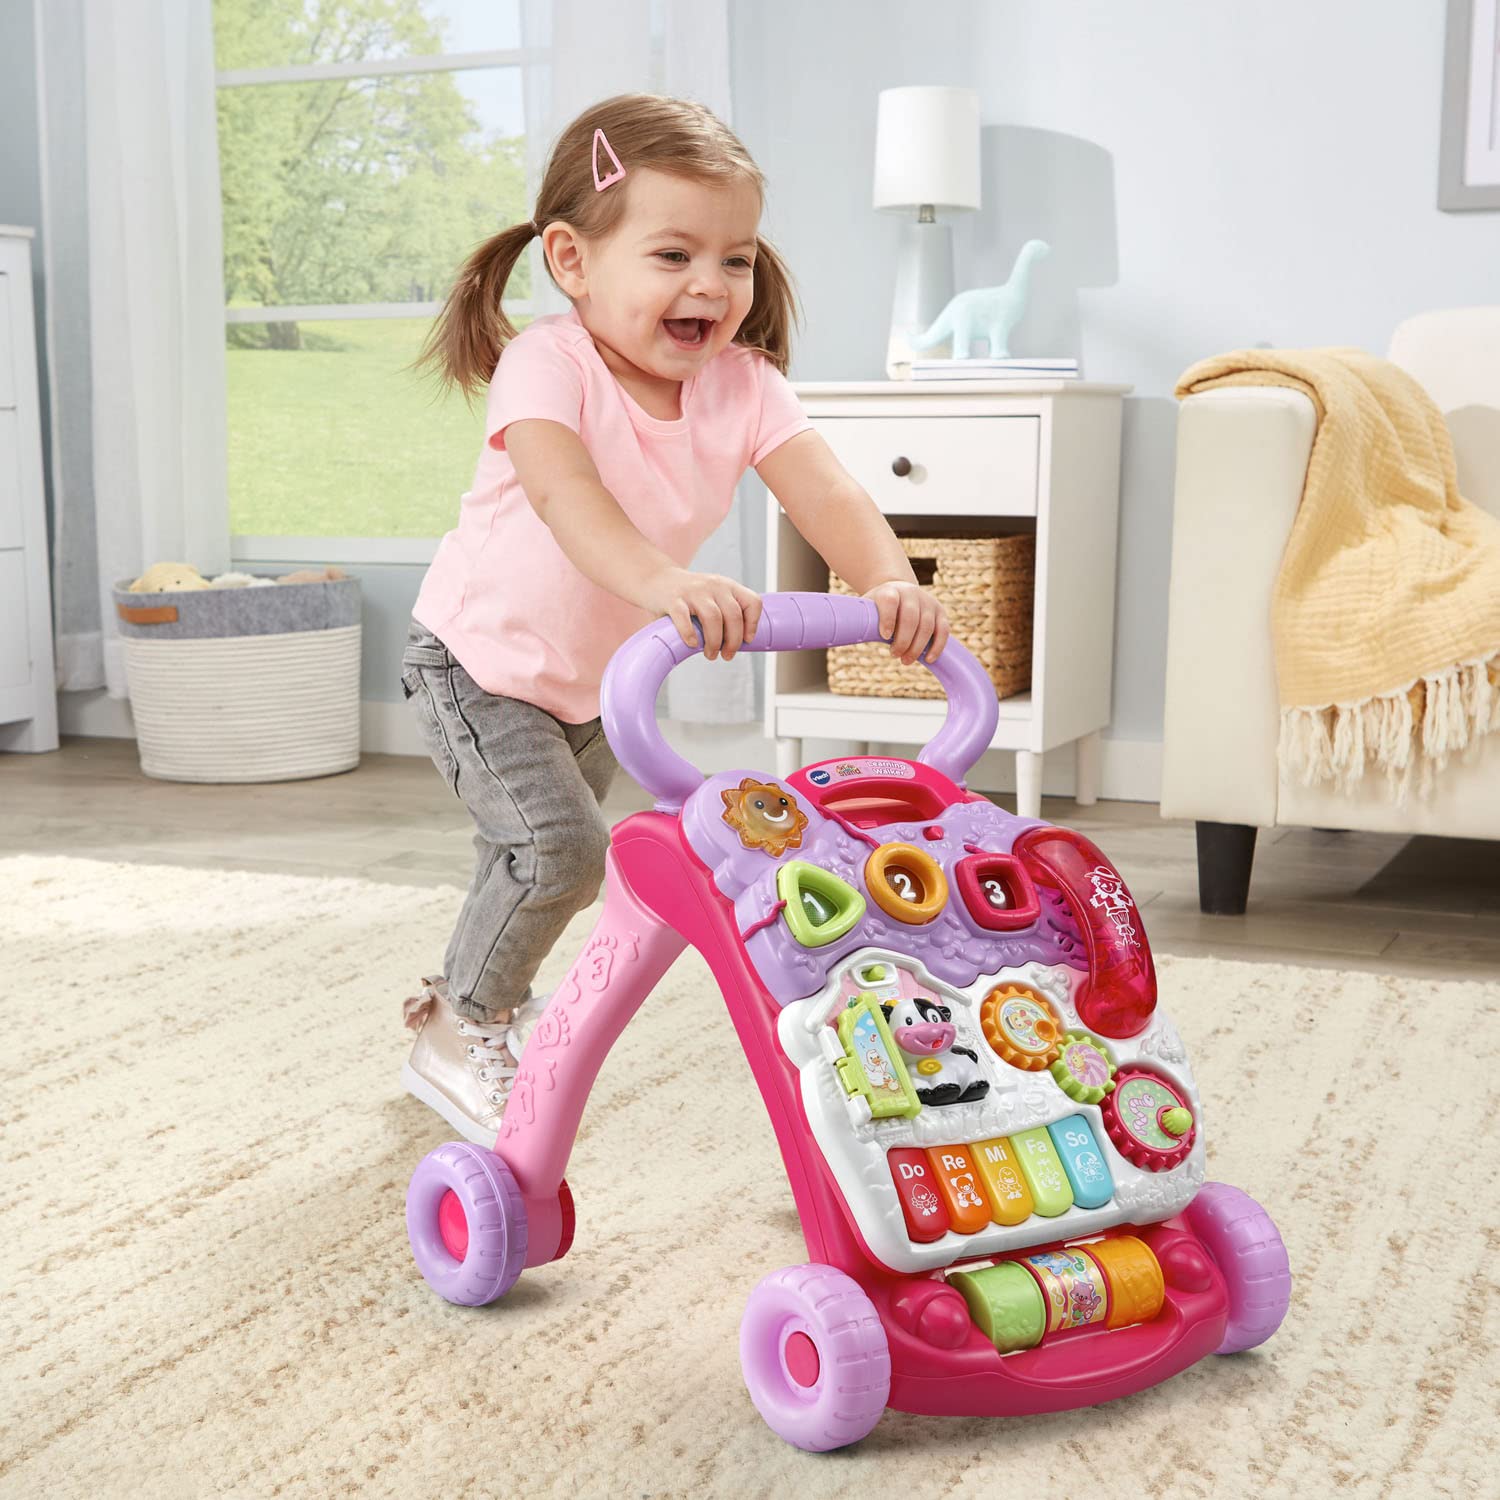 VTech Sit-to-Stand Learning Walker (Frustration Free Packaging), Pink